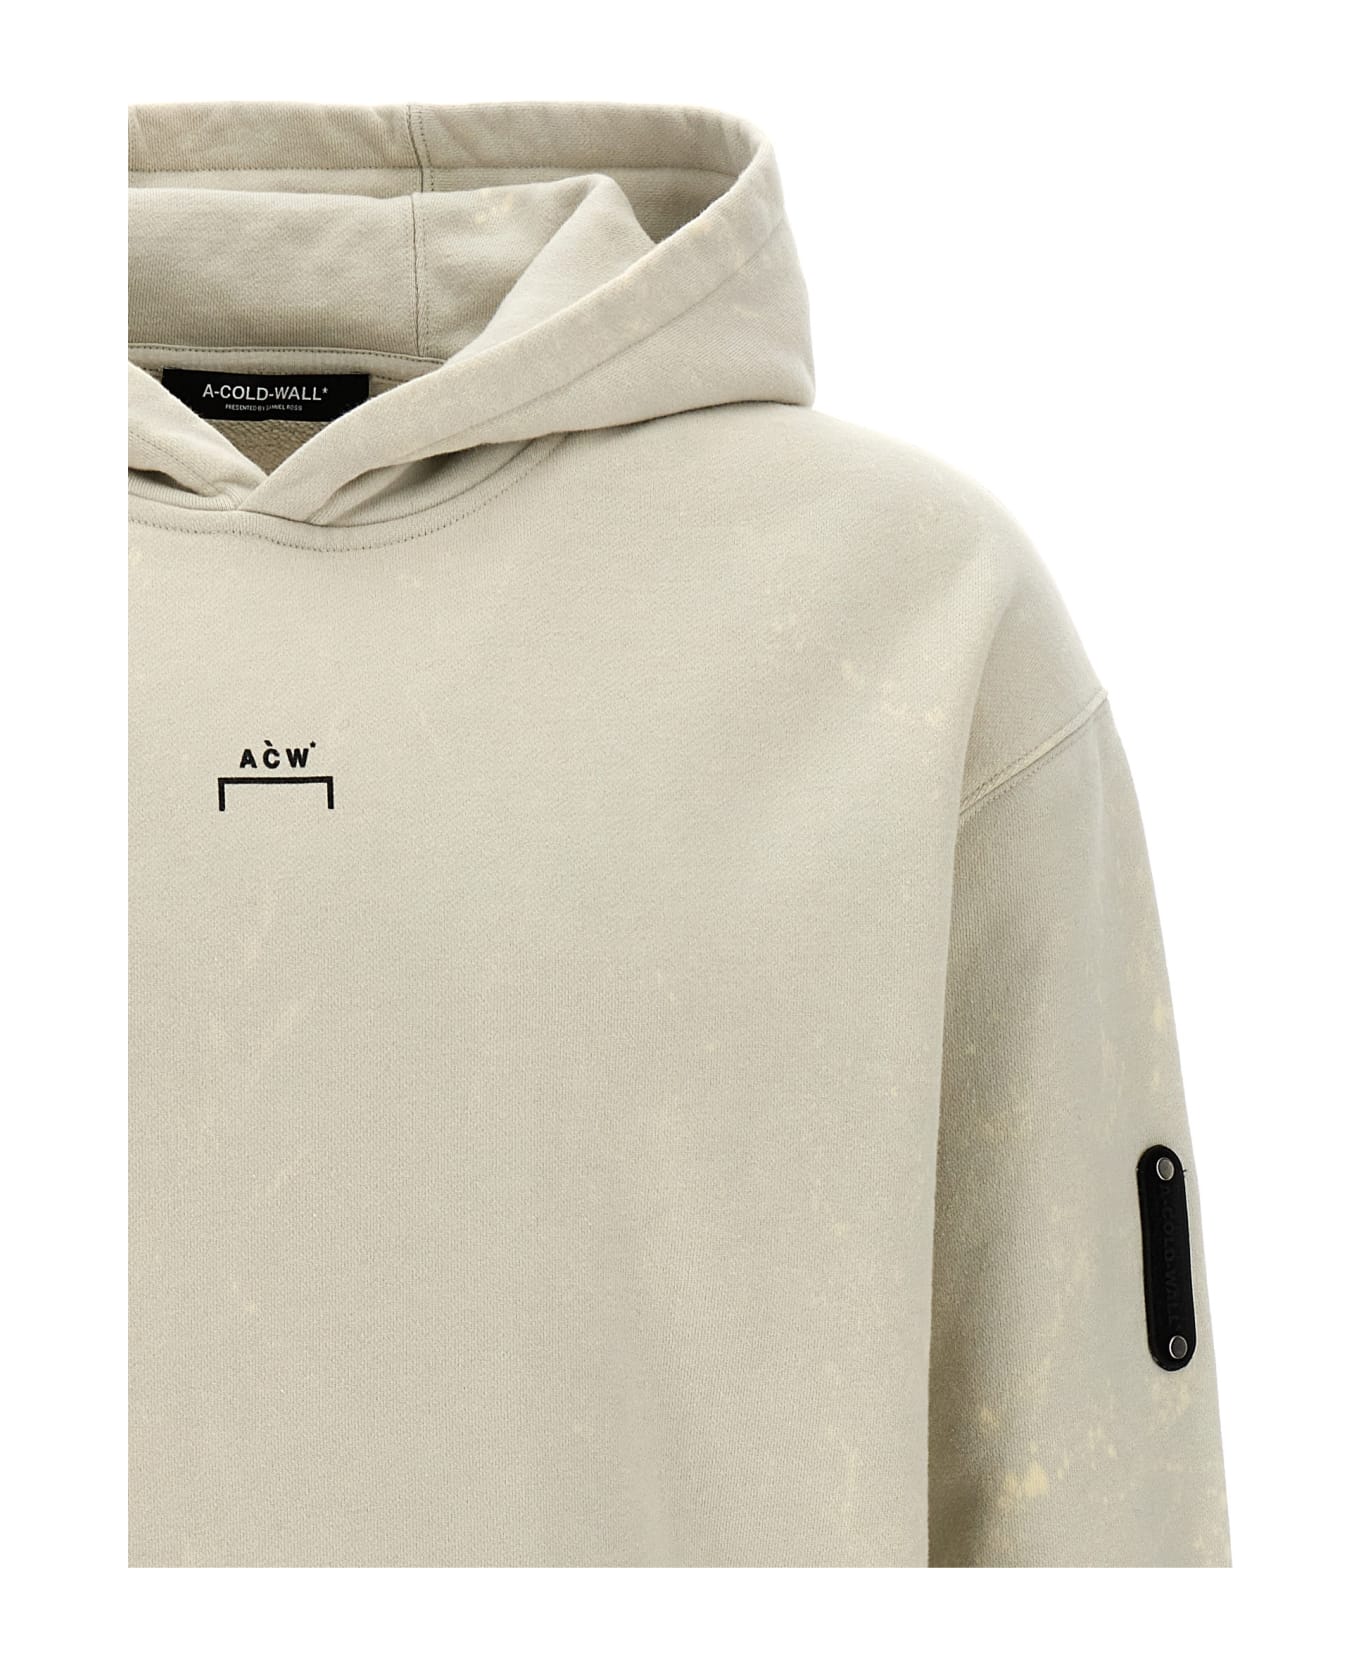 A-COLD-WALL 'bouchards' Hoodie - Multicolor